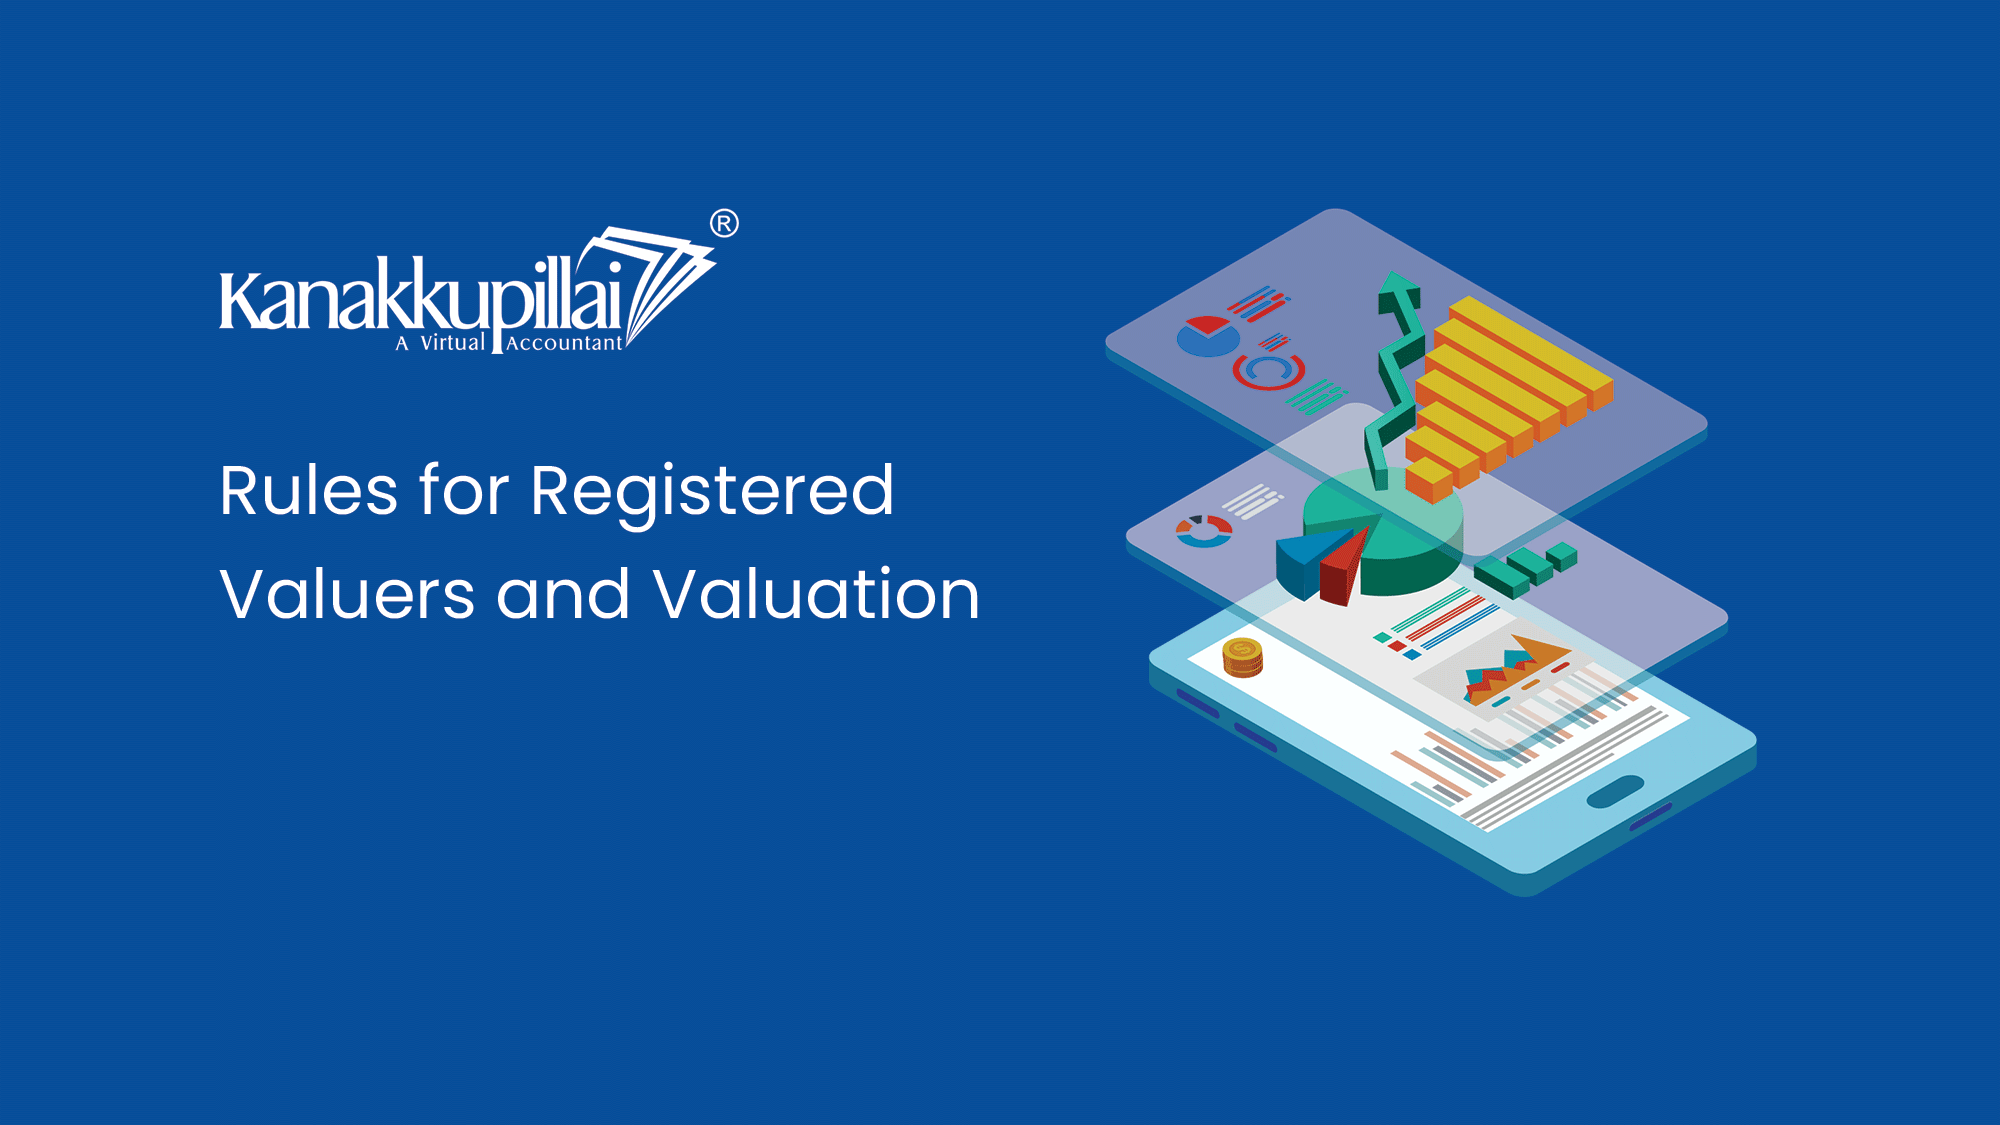 Rules for Registered Valuers and Valuation